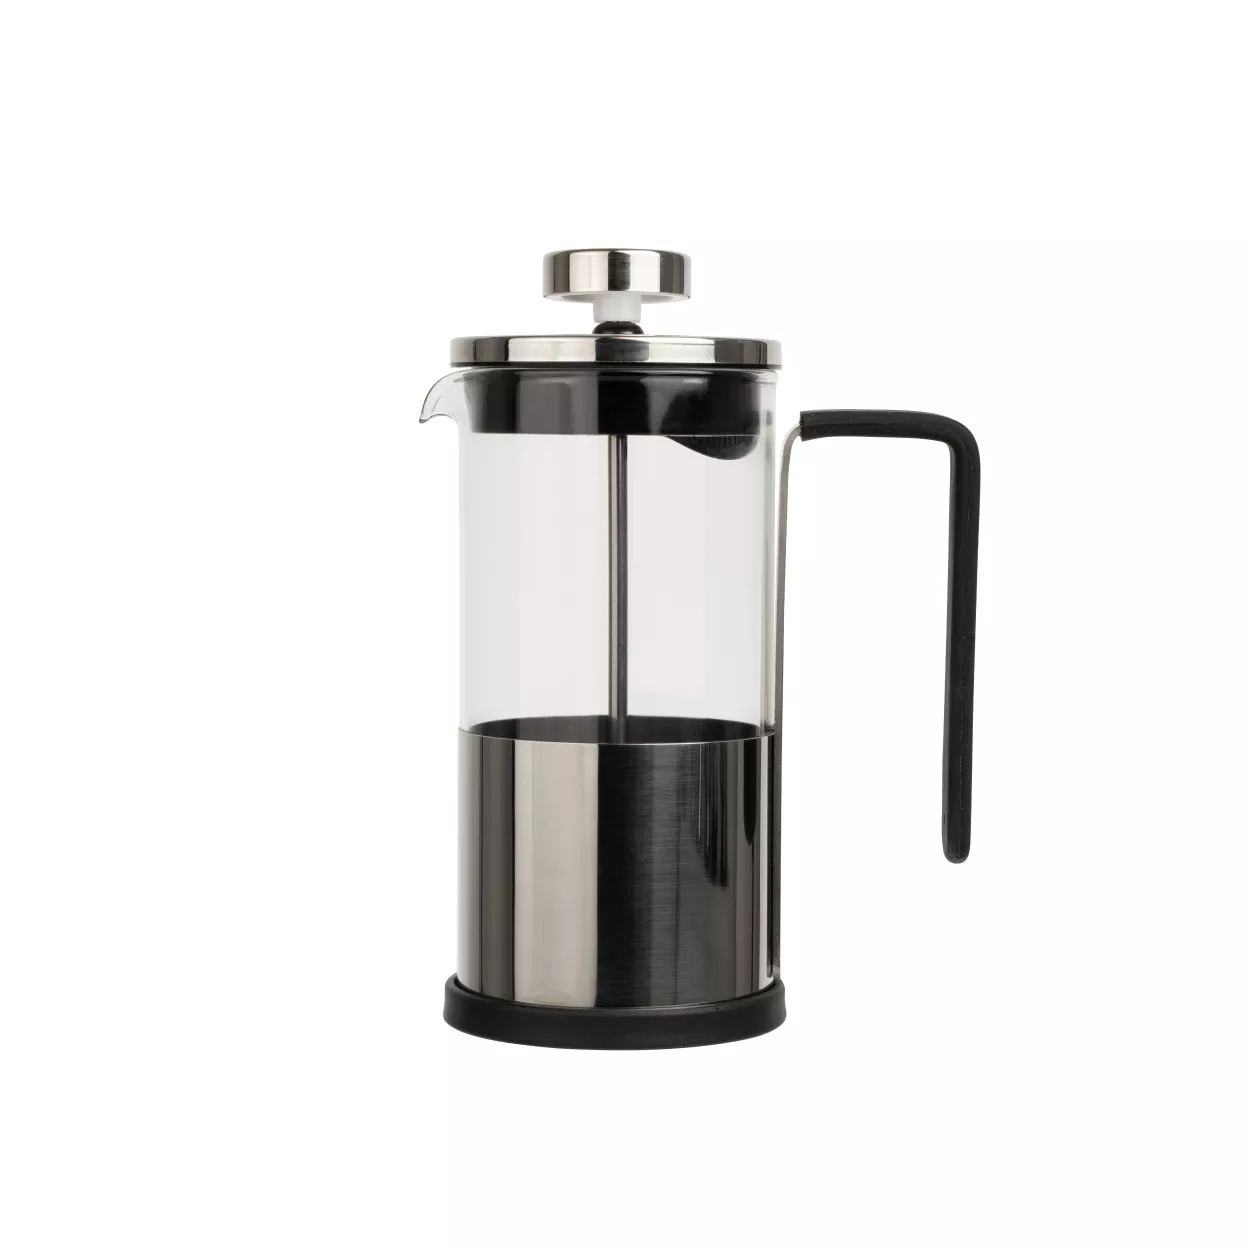 Infuso 3 Cup Glass Cafetiere